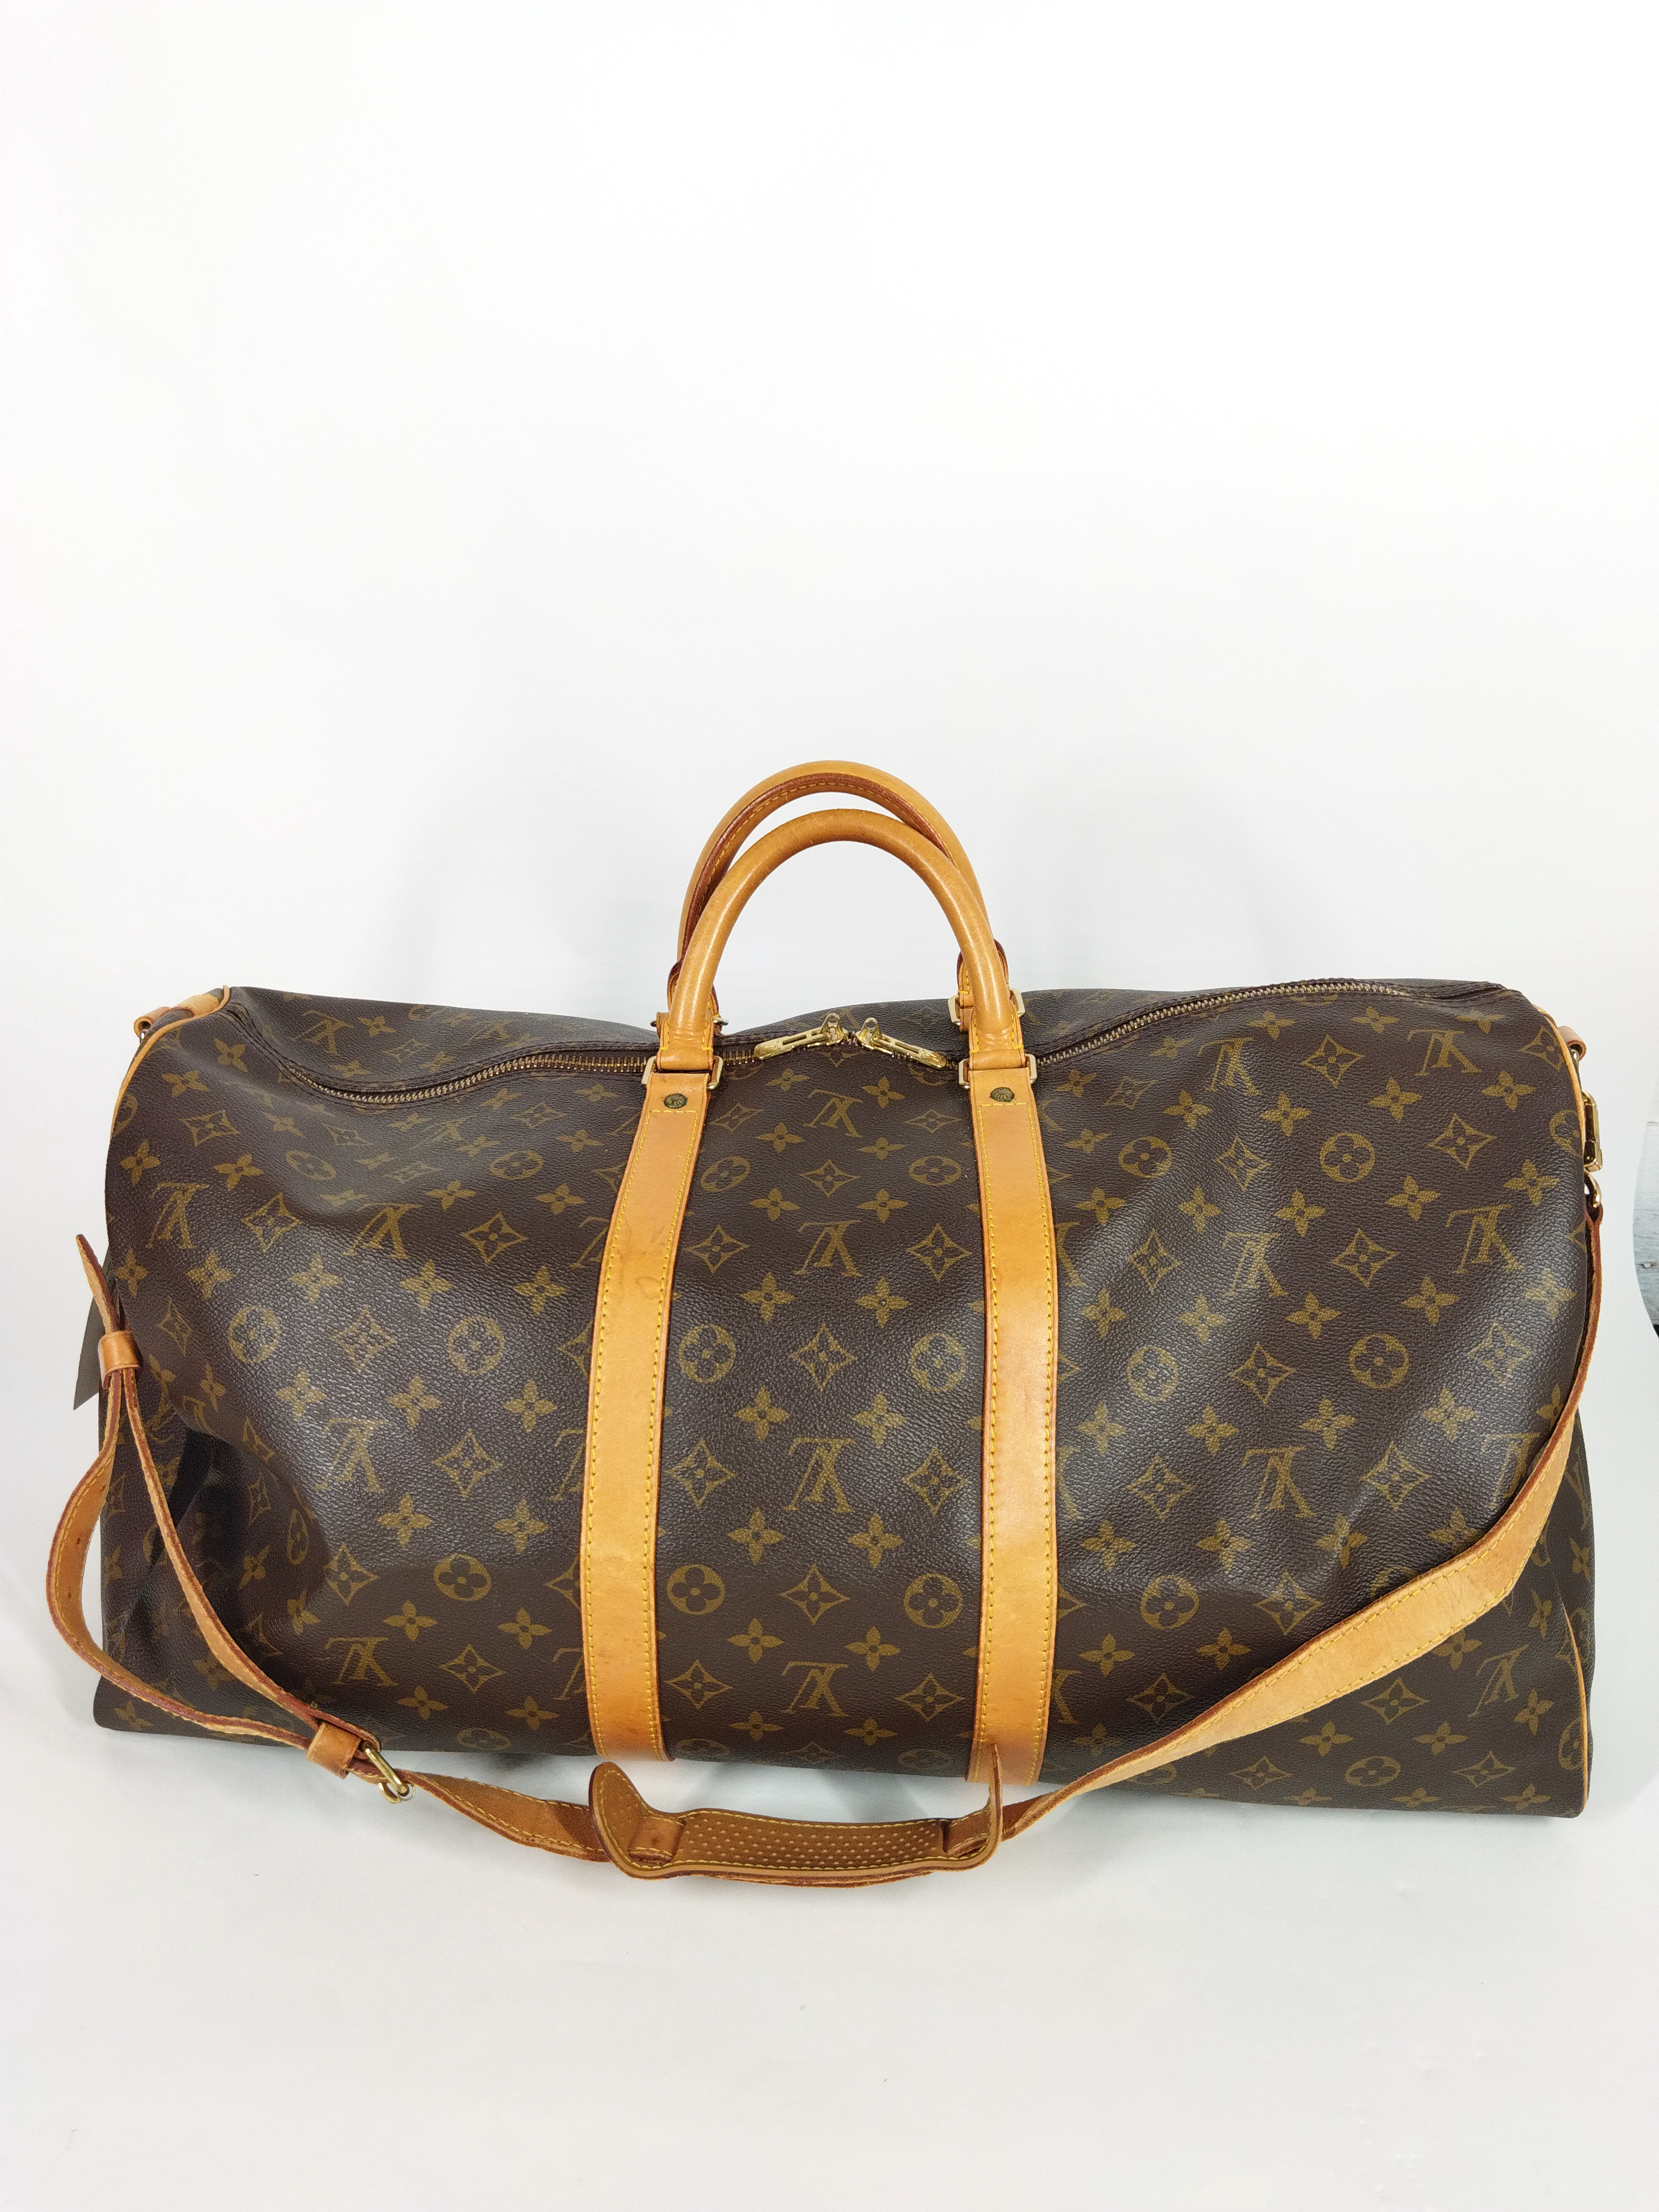 LOUIS VUITTON, Keepall Bandouliere 60 Travel bag in Brown Monogram Can